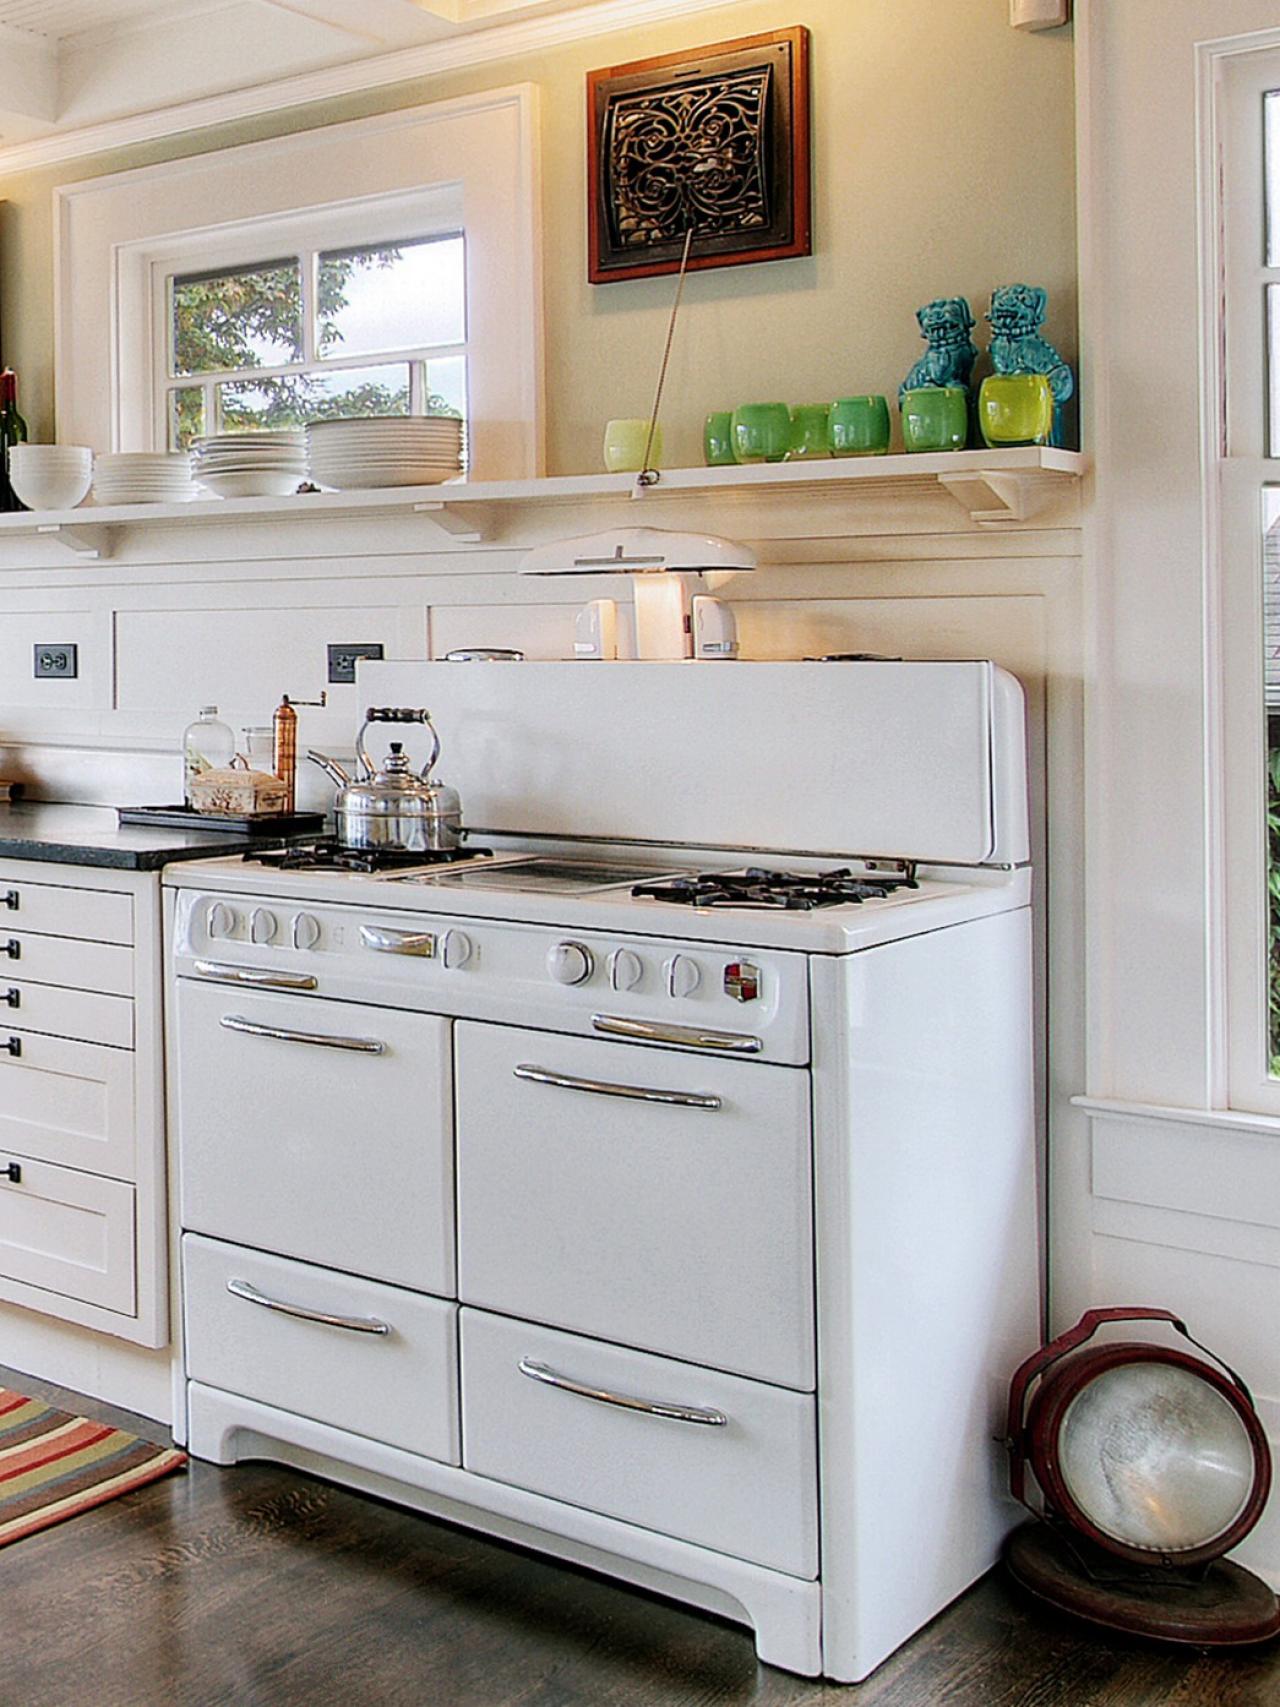 Remodeling Your Kitchen With Salvaged, How To Renovate Old Cabinets